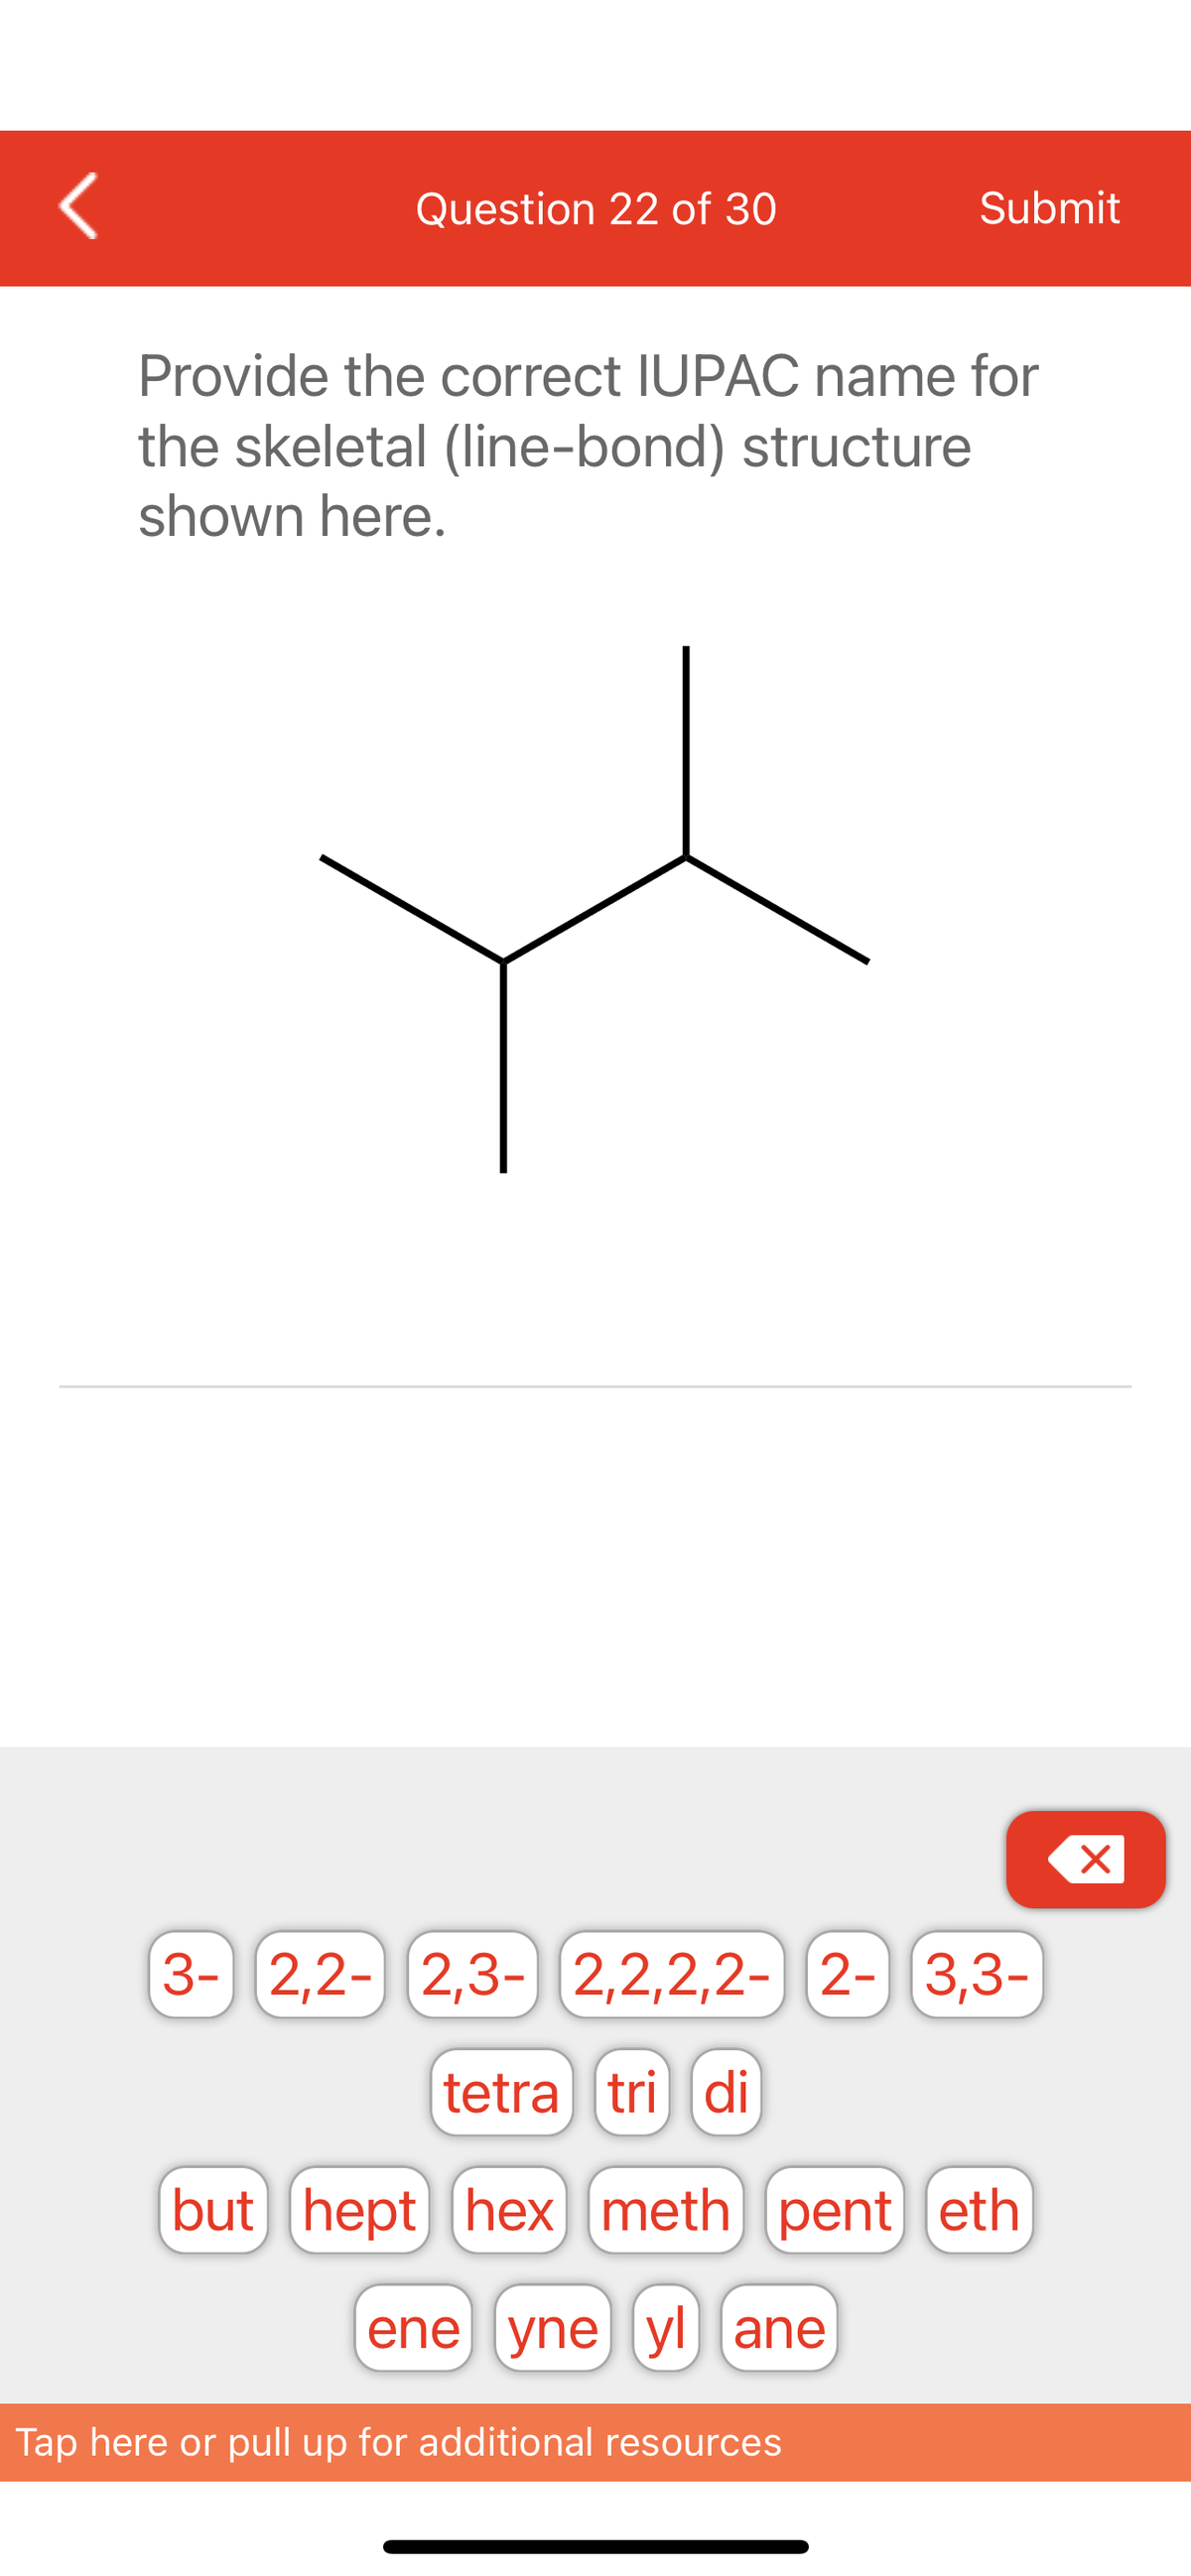 <
Question 22 of 30
Submit
Provide the correct IUPAC name for
the skeletal (line-bond) structure
shown here.
3- 2,2- 2,3- 2,2,2,2- 2- 3,3-
tetra tri di
(but hept hex meth) pent eth
ene yne yl ane
Tap here or pull up for additional resources
X